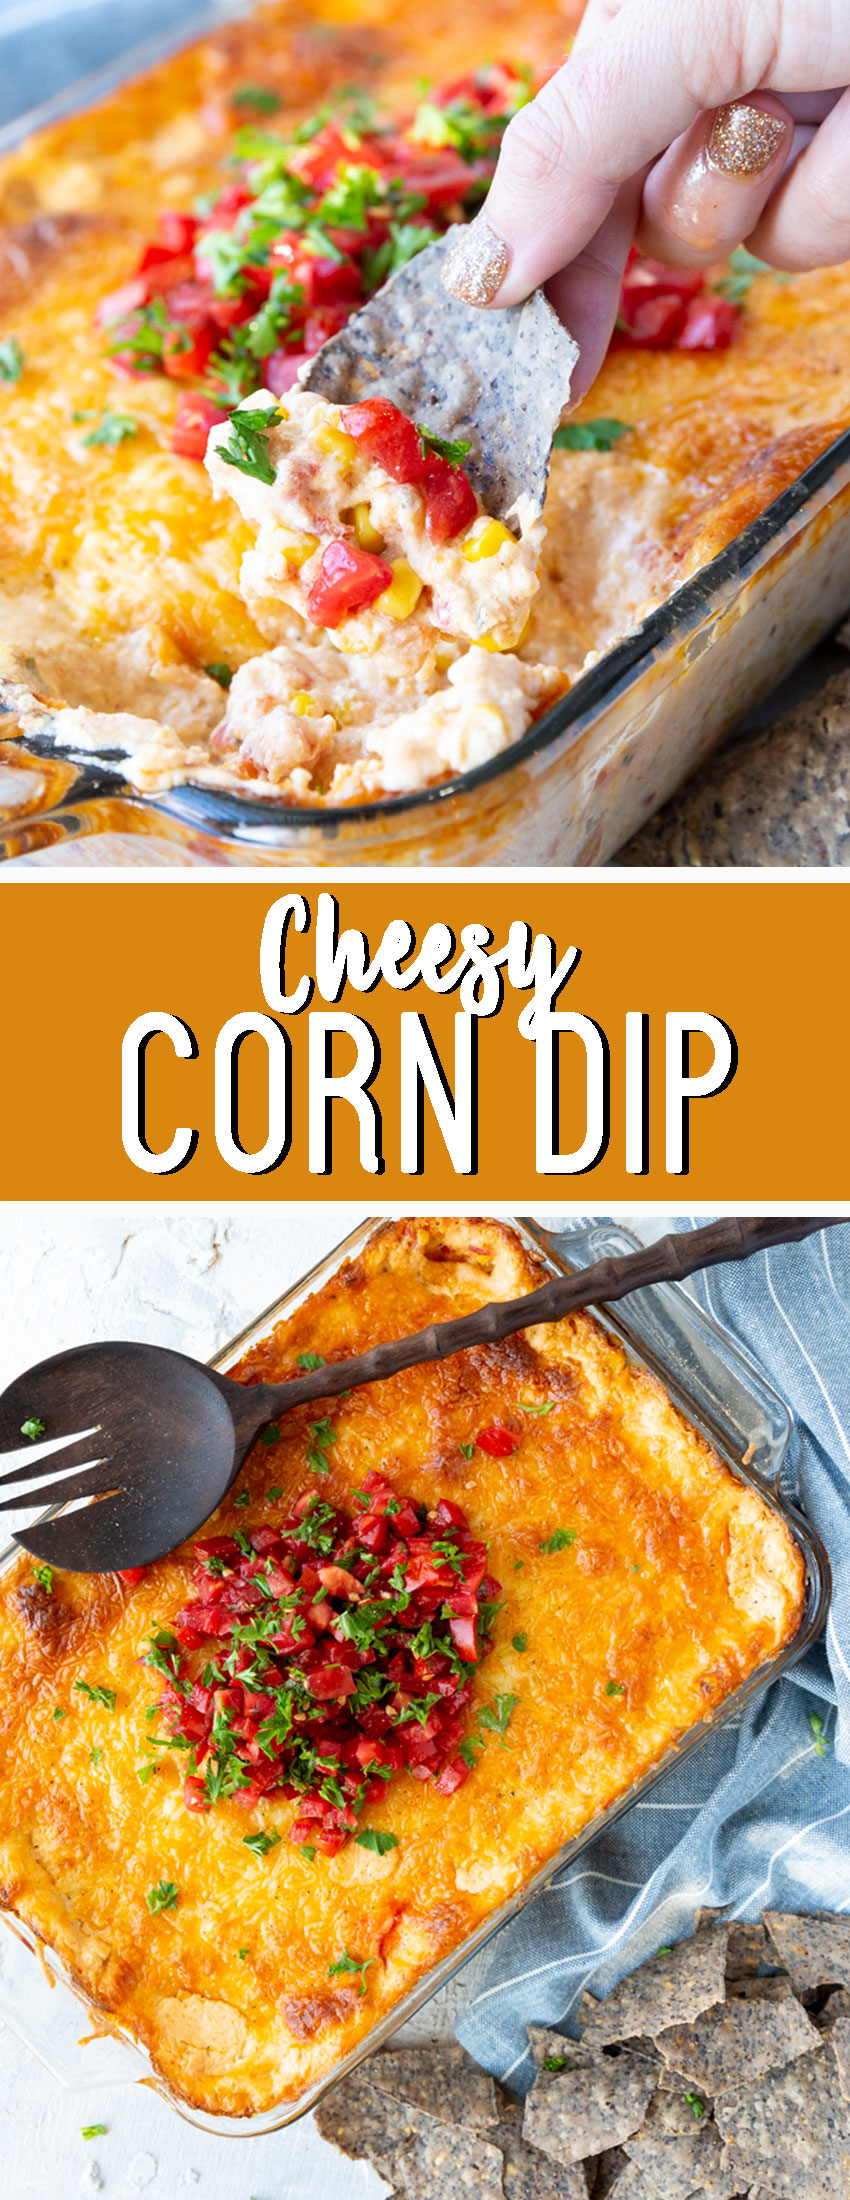 Cheesy corn dip: creamy, cheesy, and delicious with sweet corn, and topped with fresh tomatoes. This is such a good appetizer. 